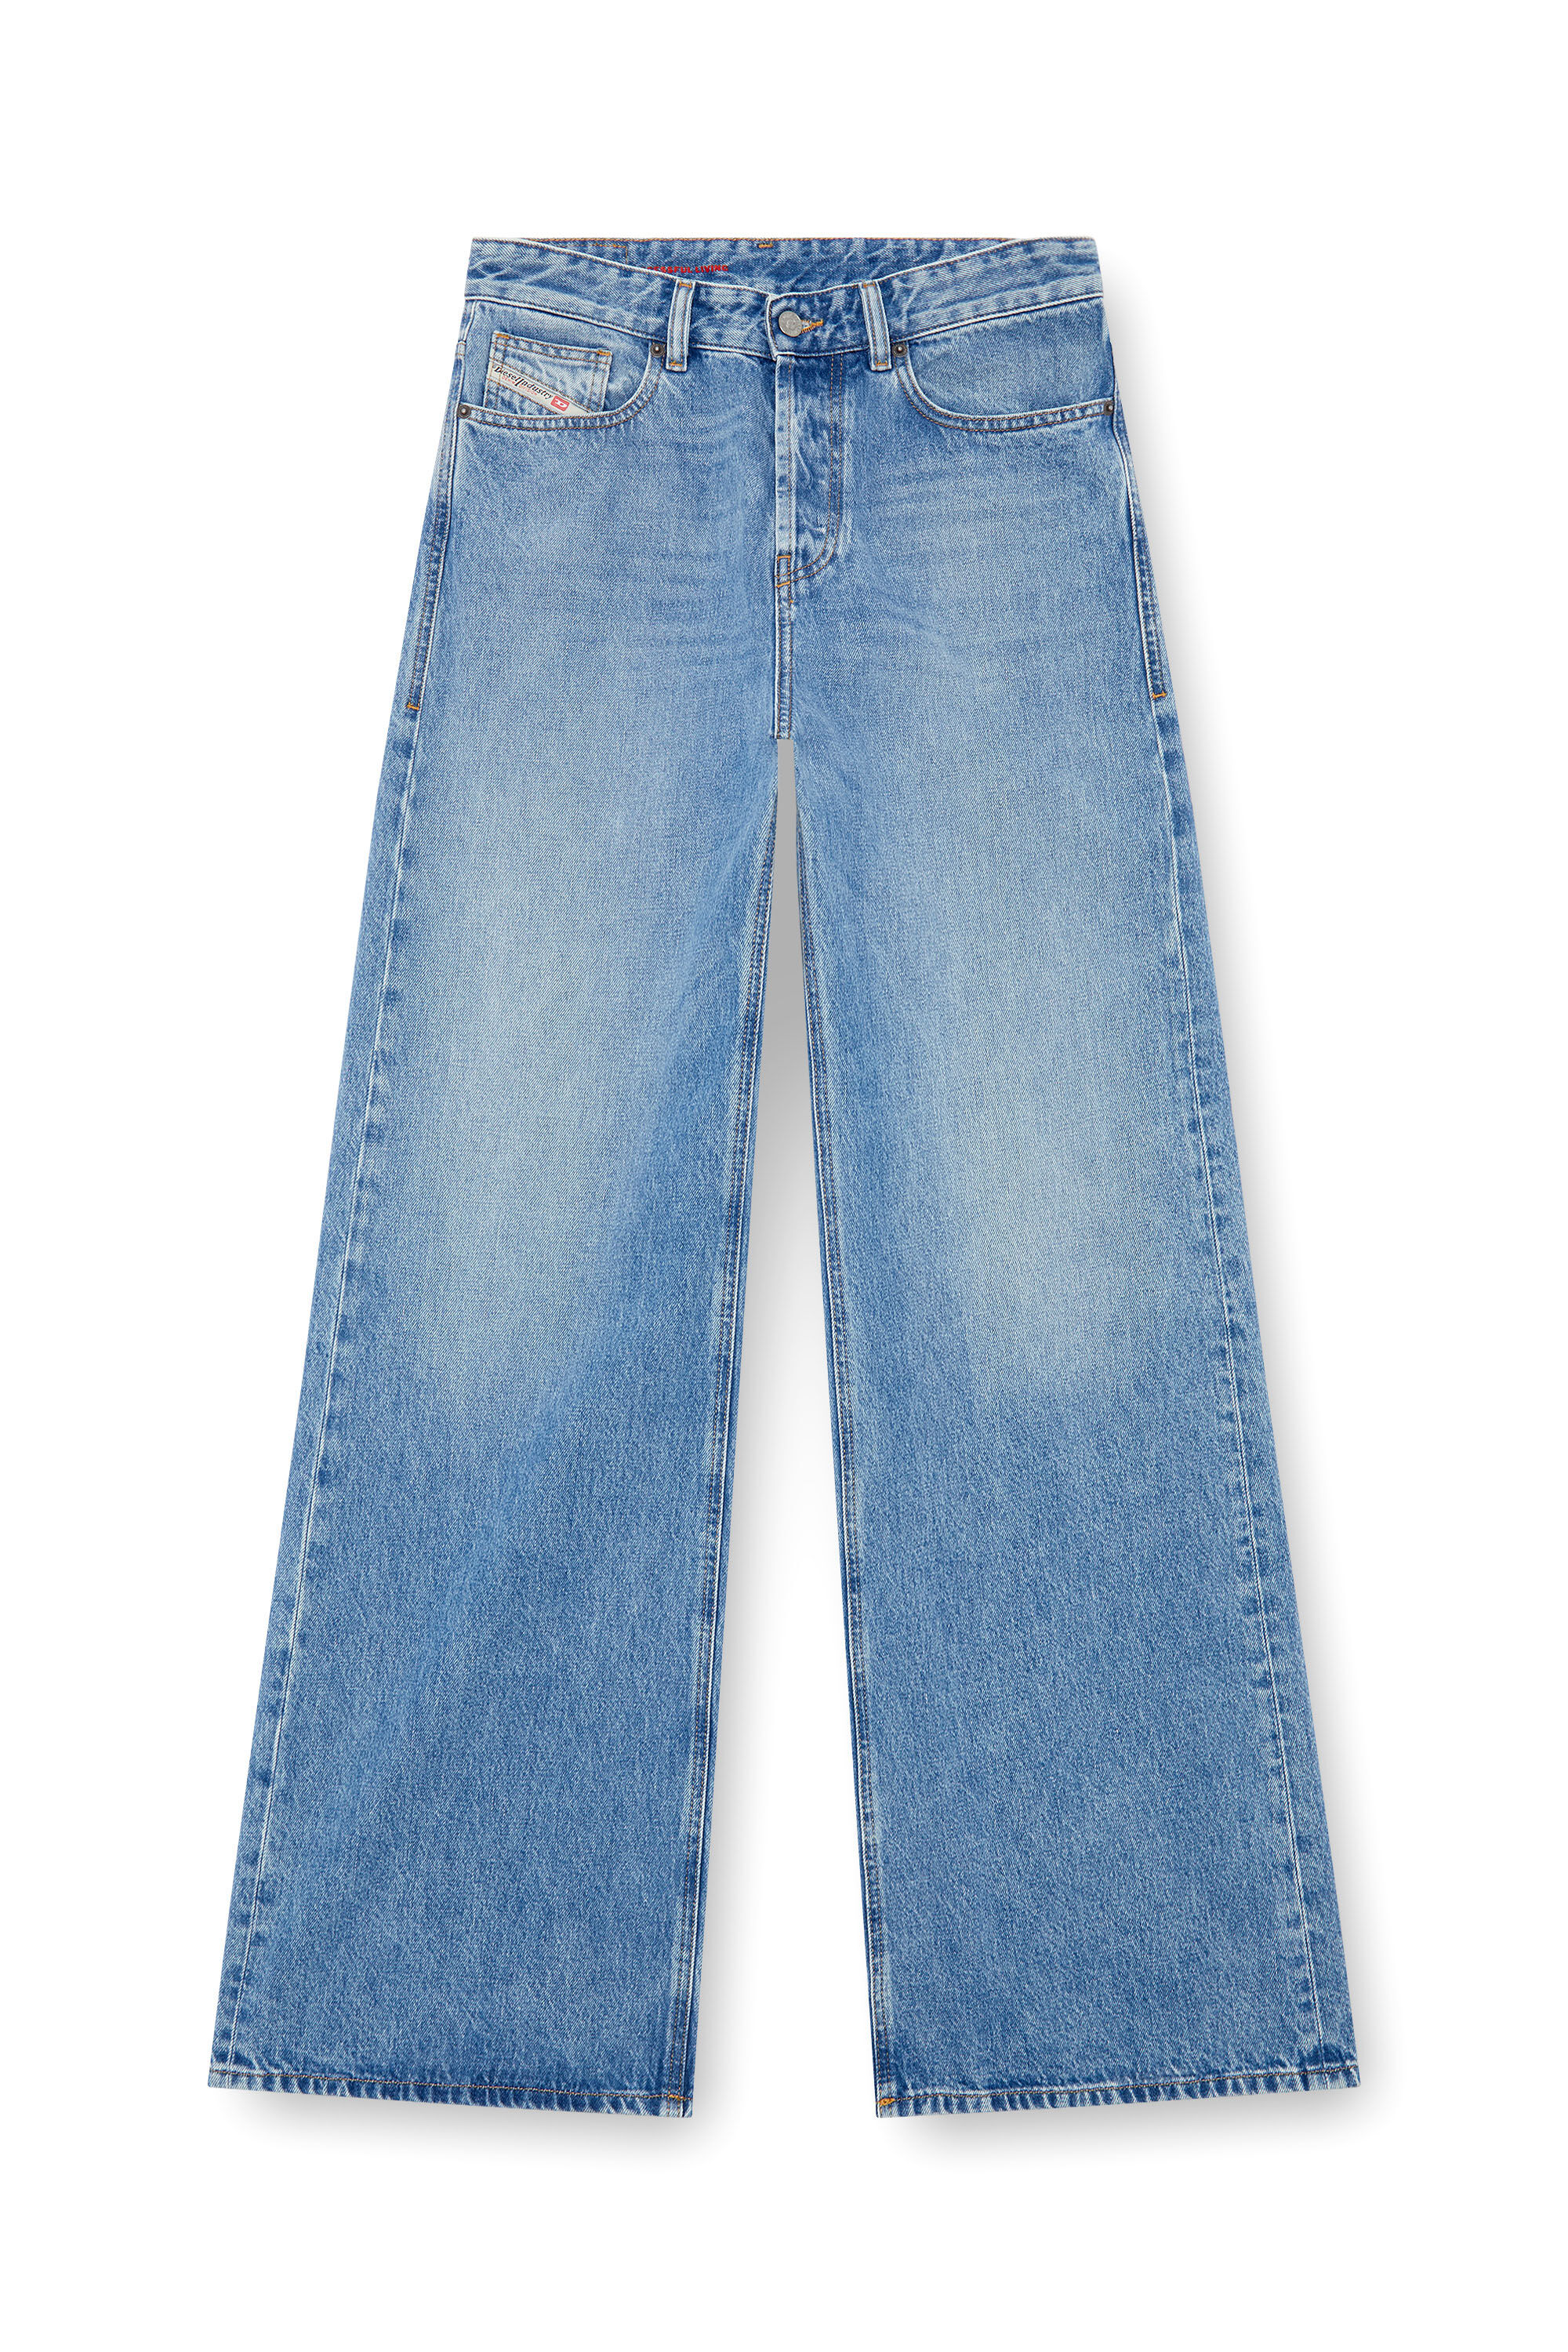 Diesel - Straight Jeans 1996 D-Sire 09I29, Mujer Straight Jeans - 1996 D-Sire in Azul marino - Image 2